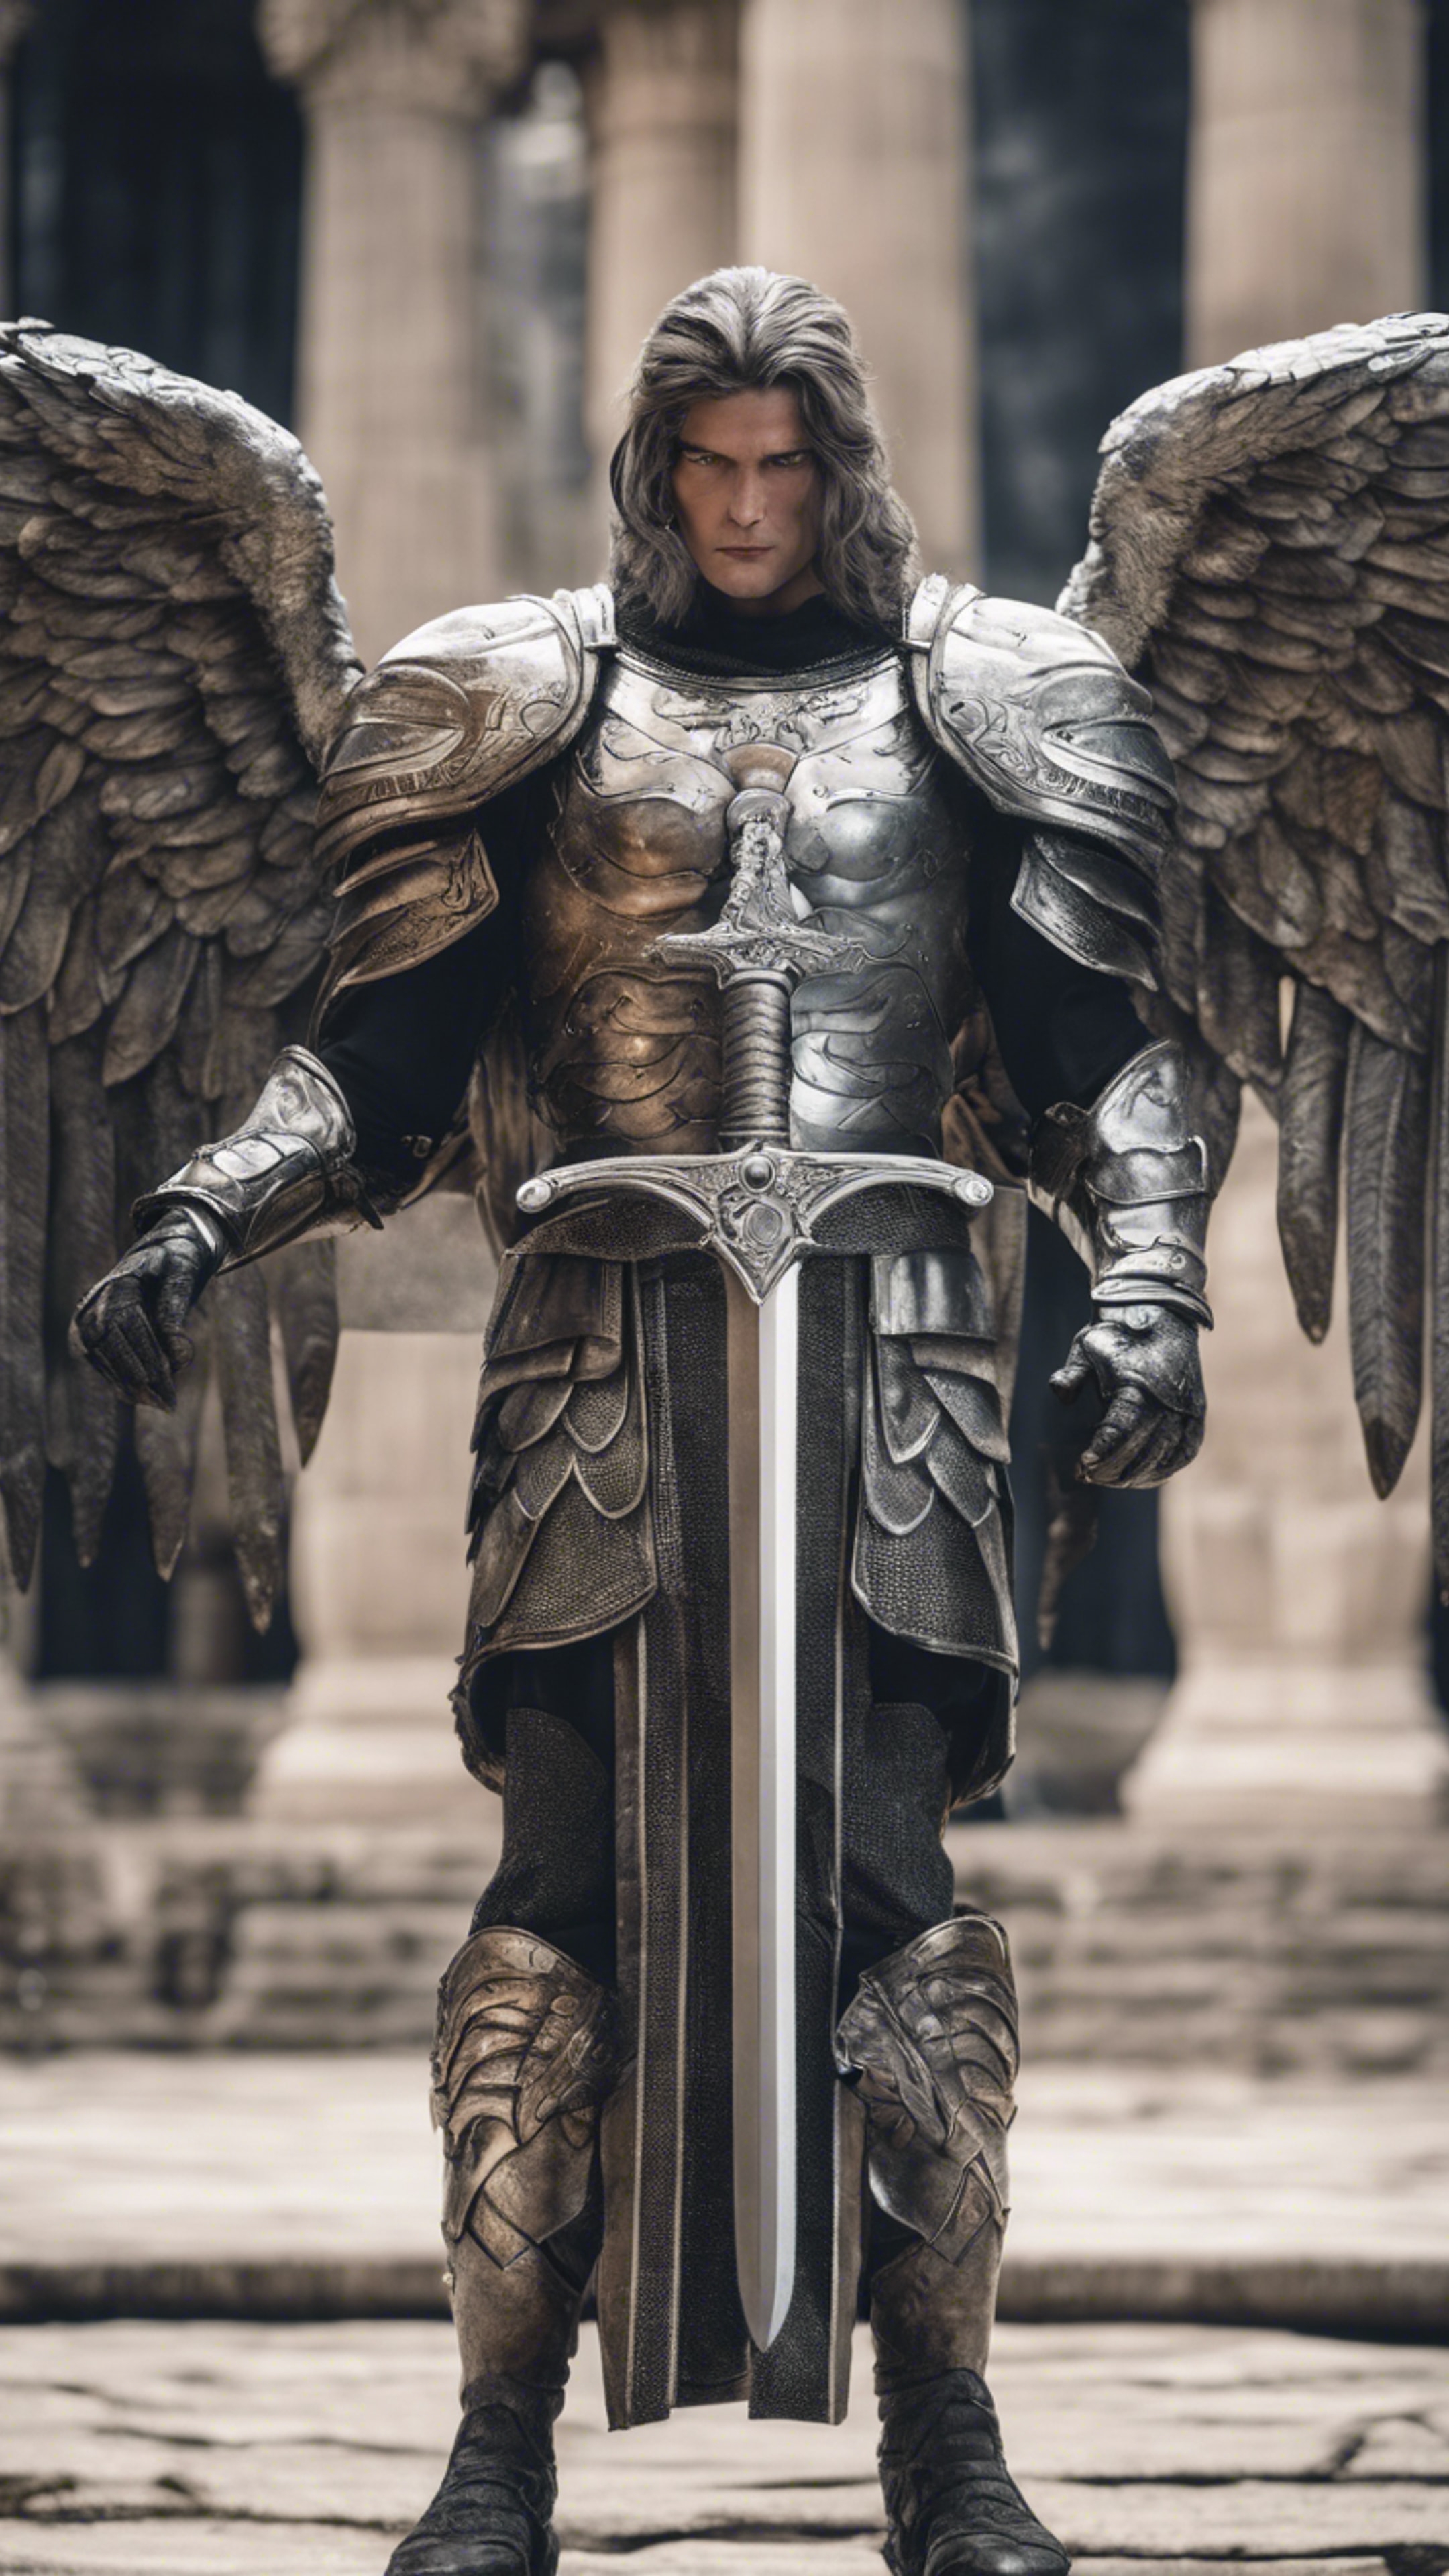 A strong archangel with a great silver sword in battle stance. Kertas dinding[1419cc1cb5fd40c69a58]